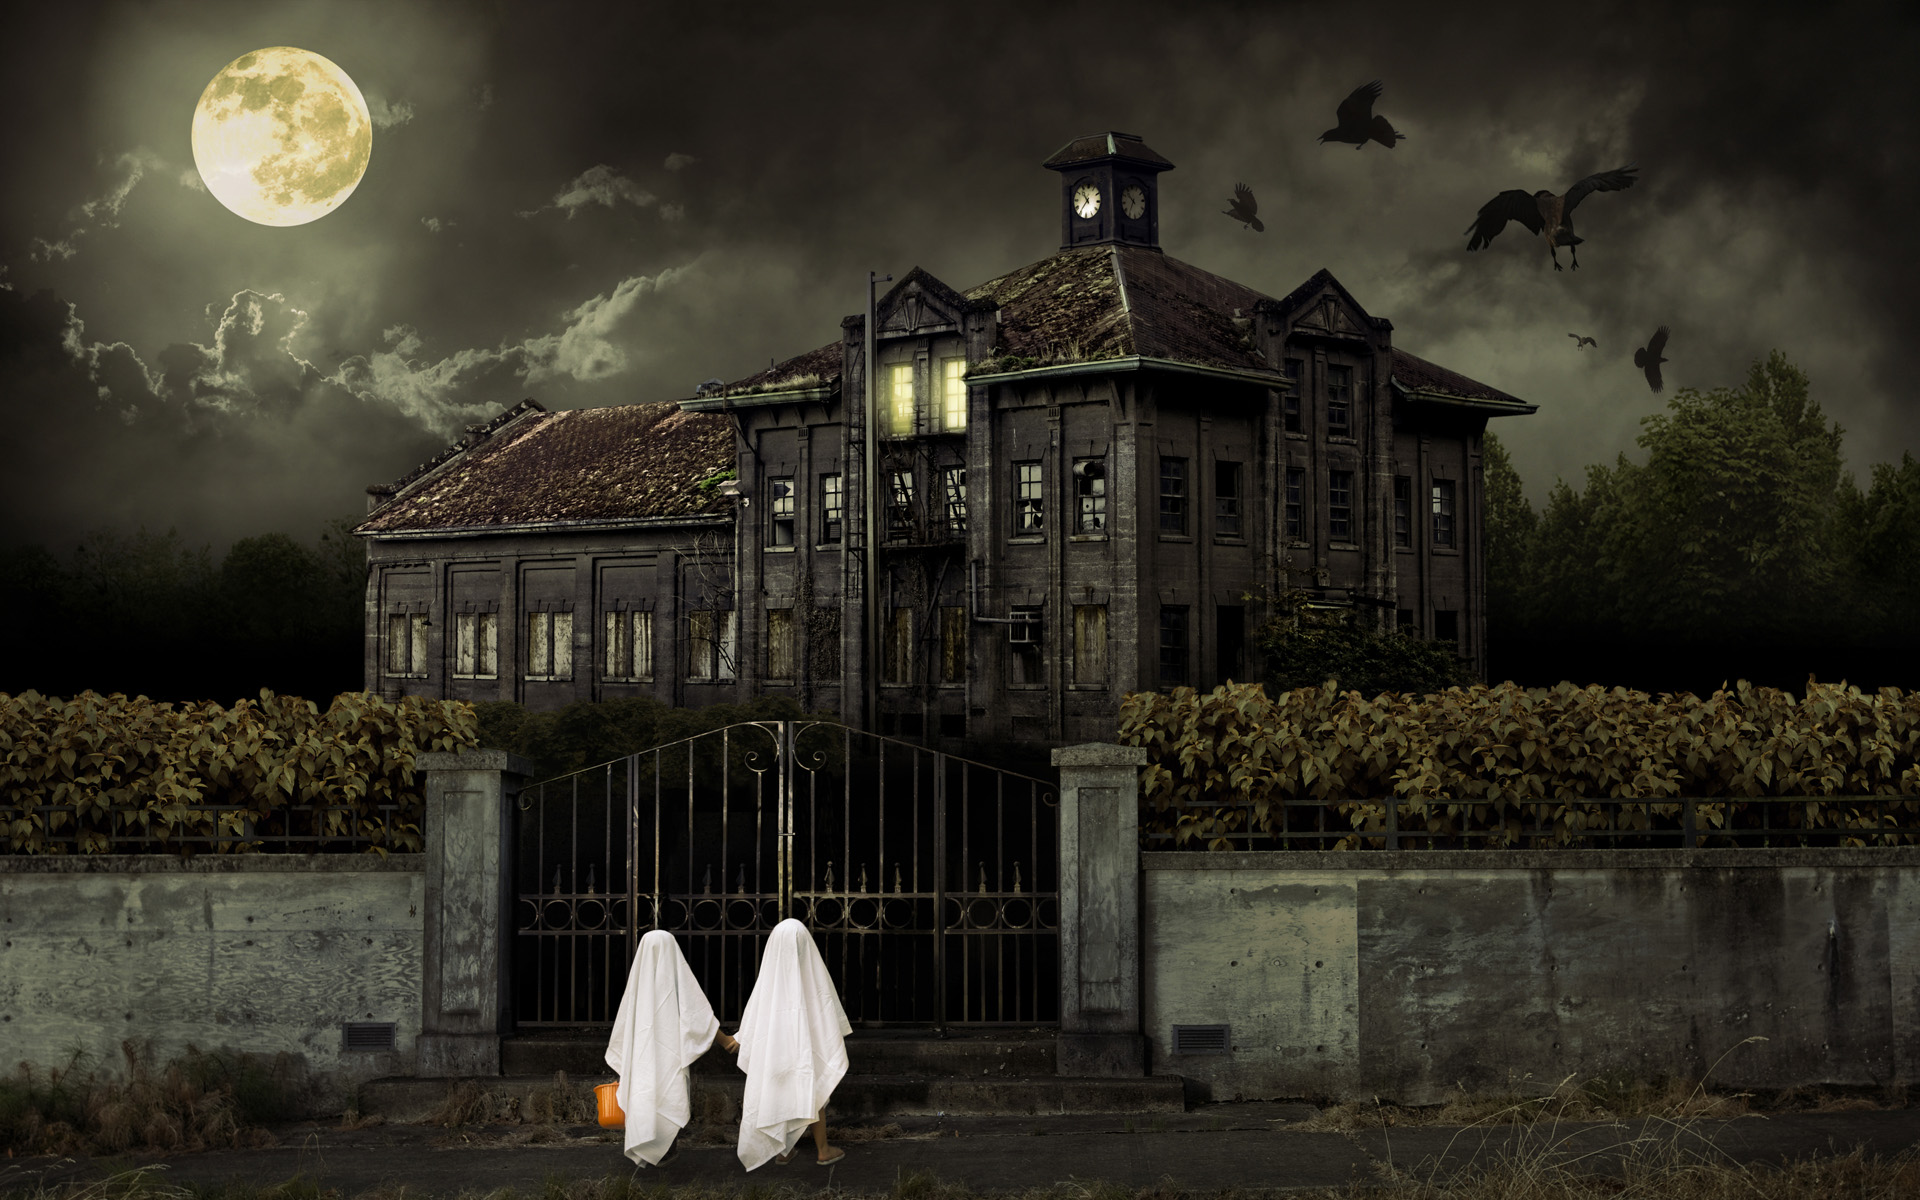 Download Scary Halloween Background 18941 1920x1200 px High Definition Wallpaper